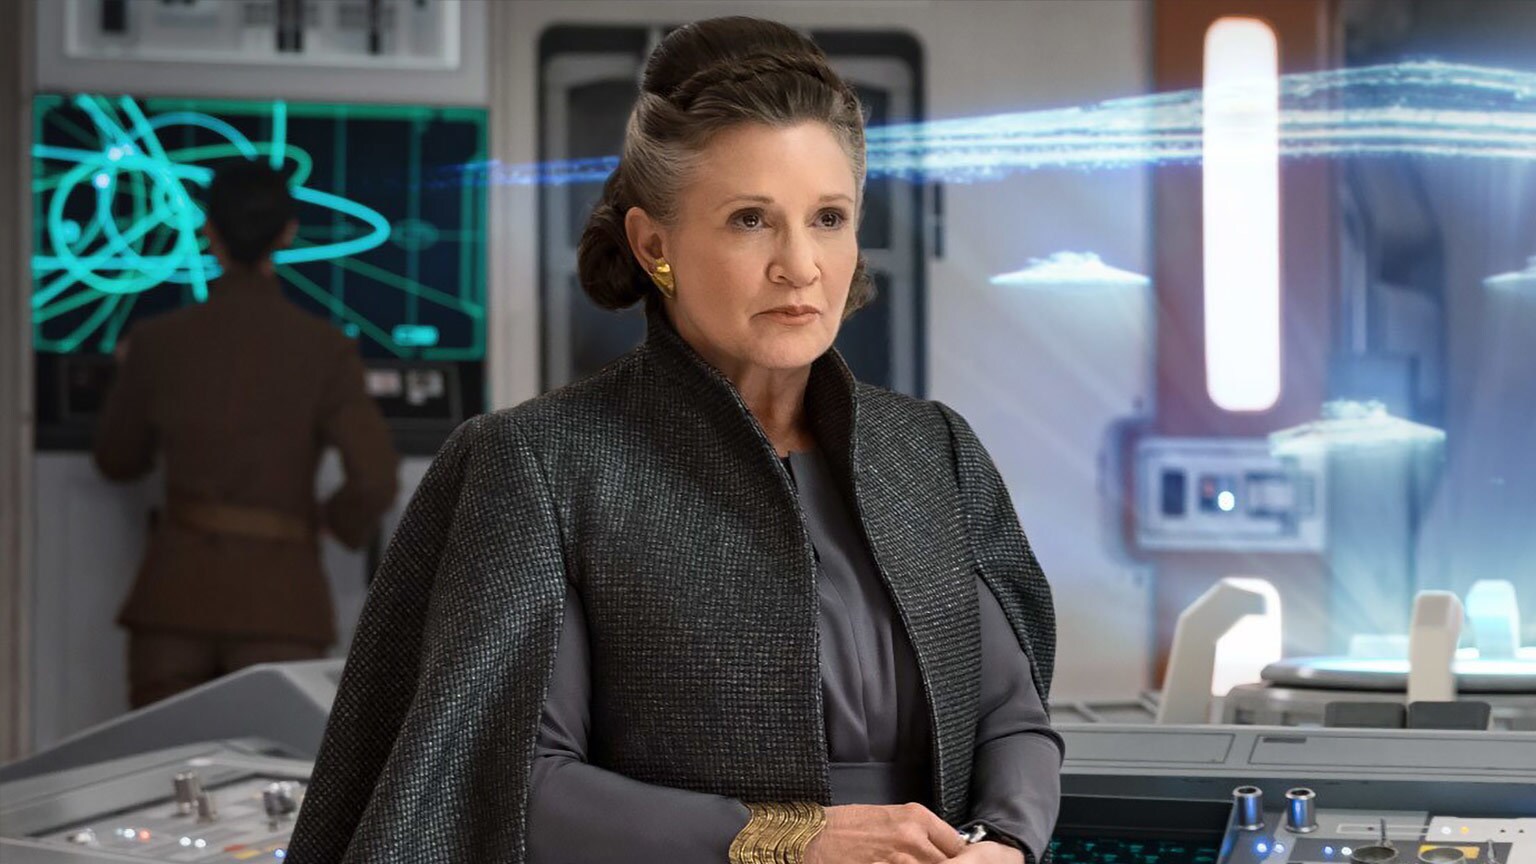 From a Certain Point of View: What is Leia Organa's Greatest Moment?